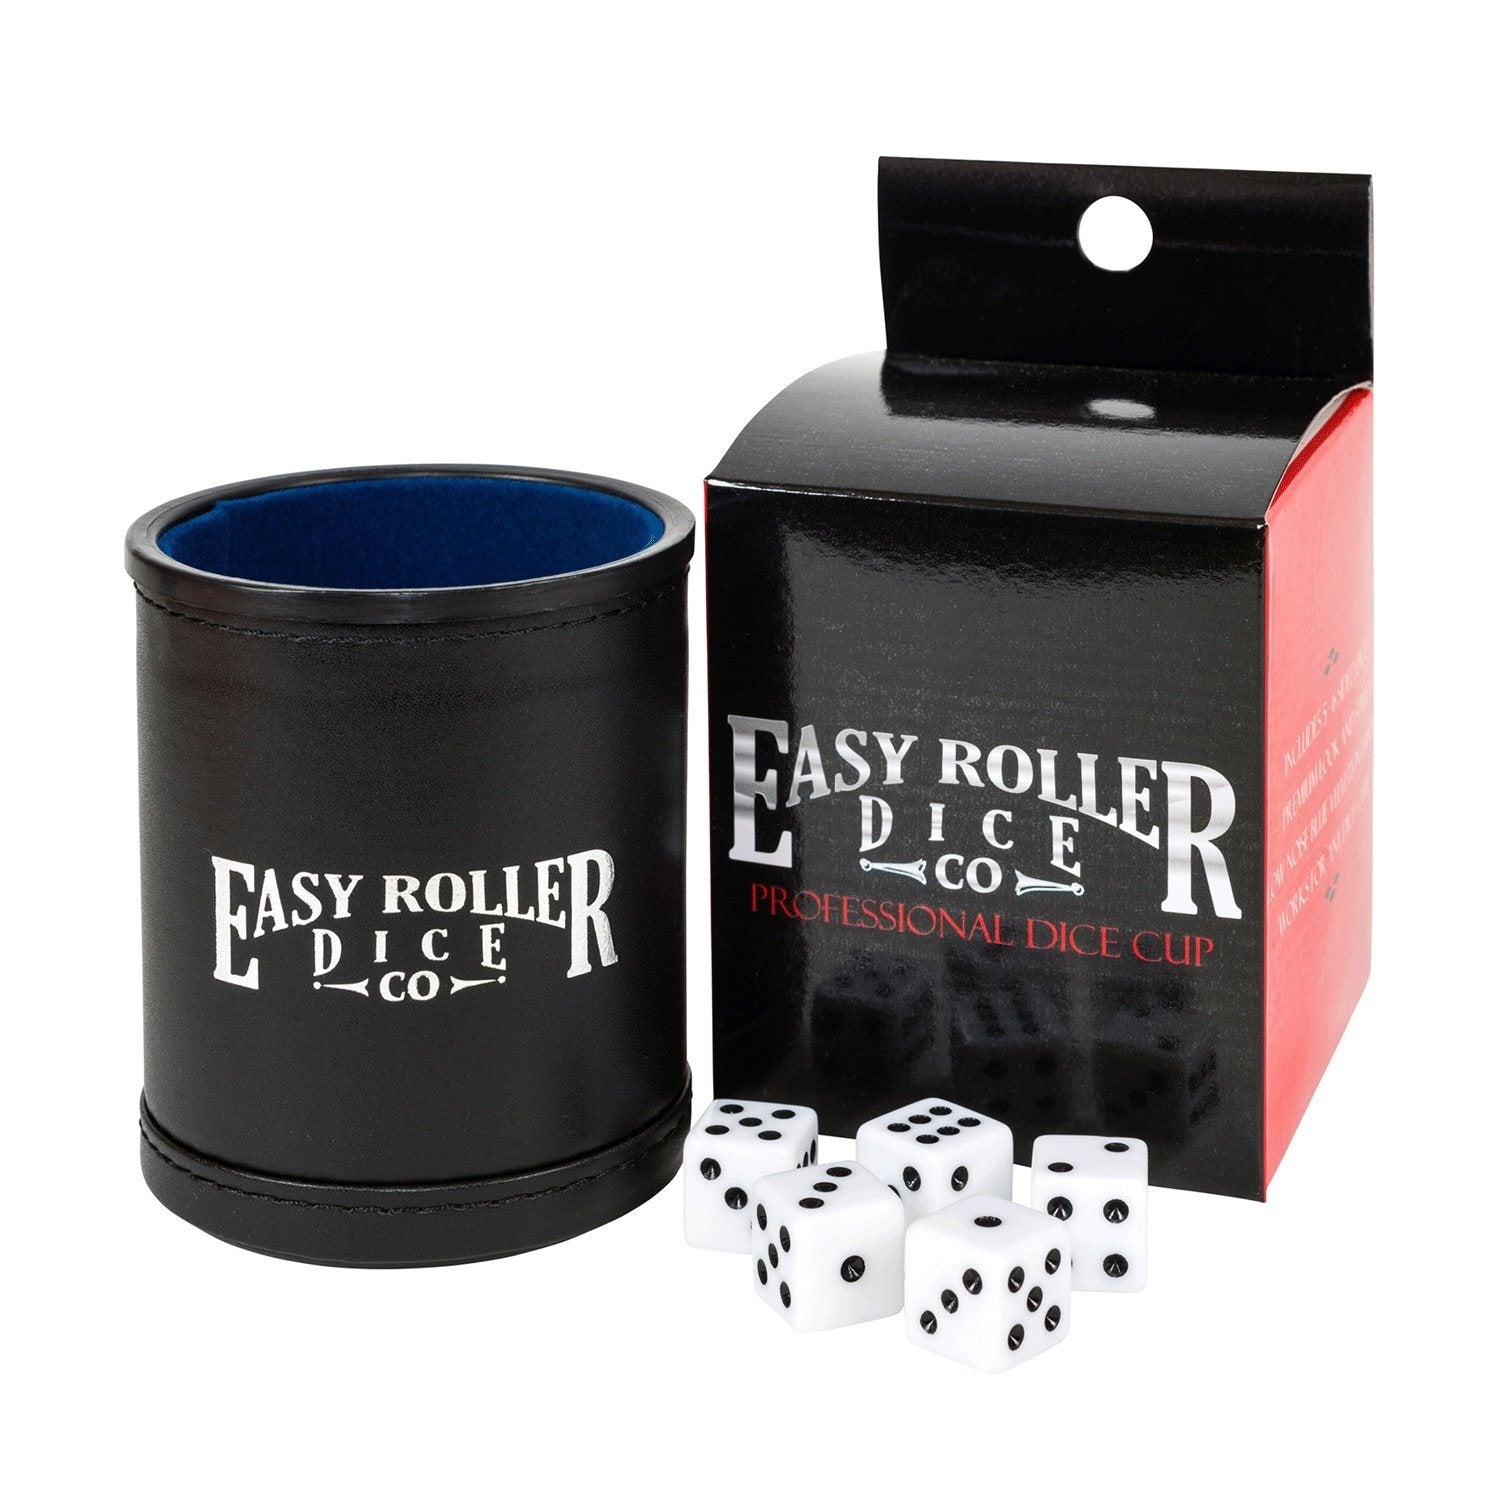 Leather Lite Dice Cup For all Types of Games - Easy Roller Dice Company